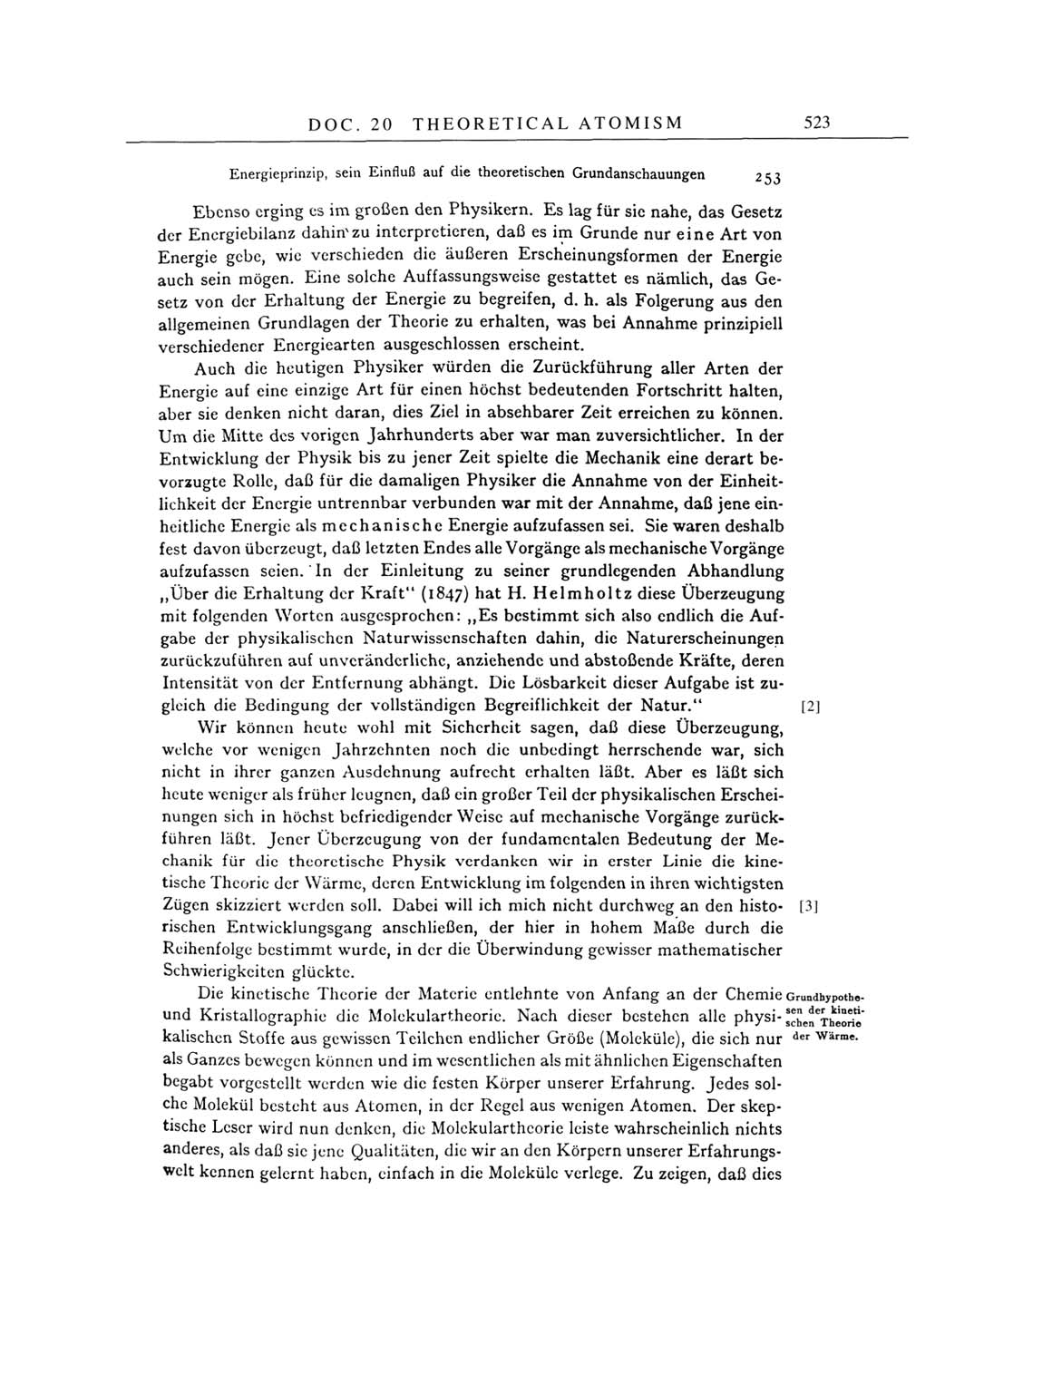 Volume 4: The Swiss Years: Writings 1912-1914 page 523